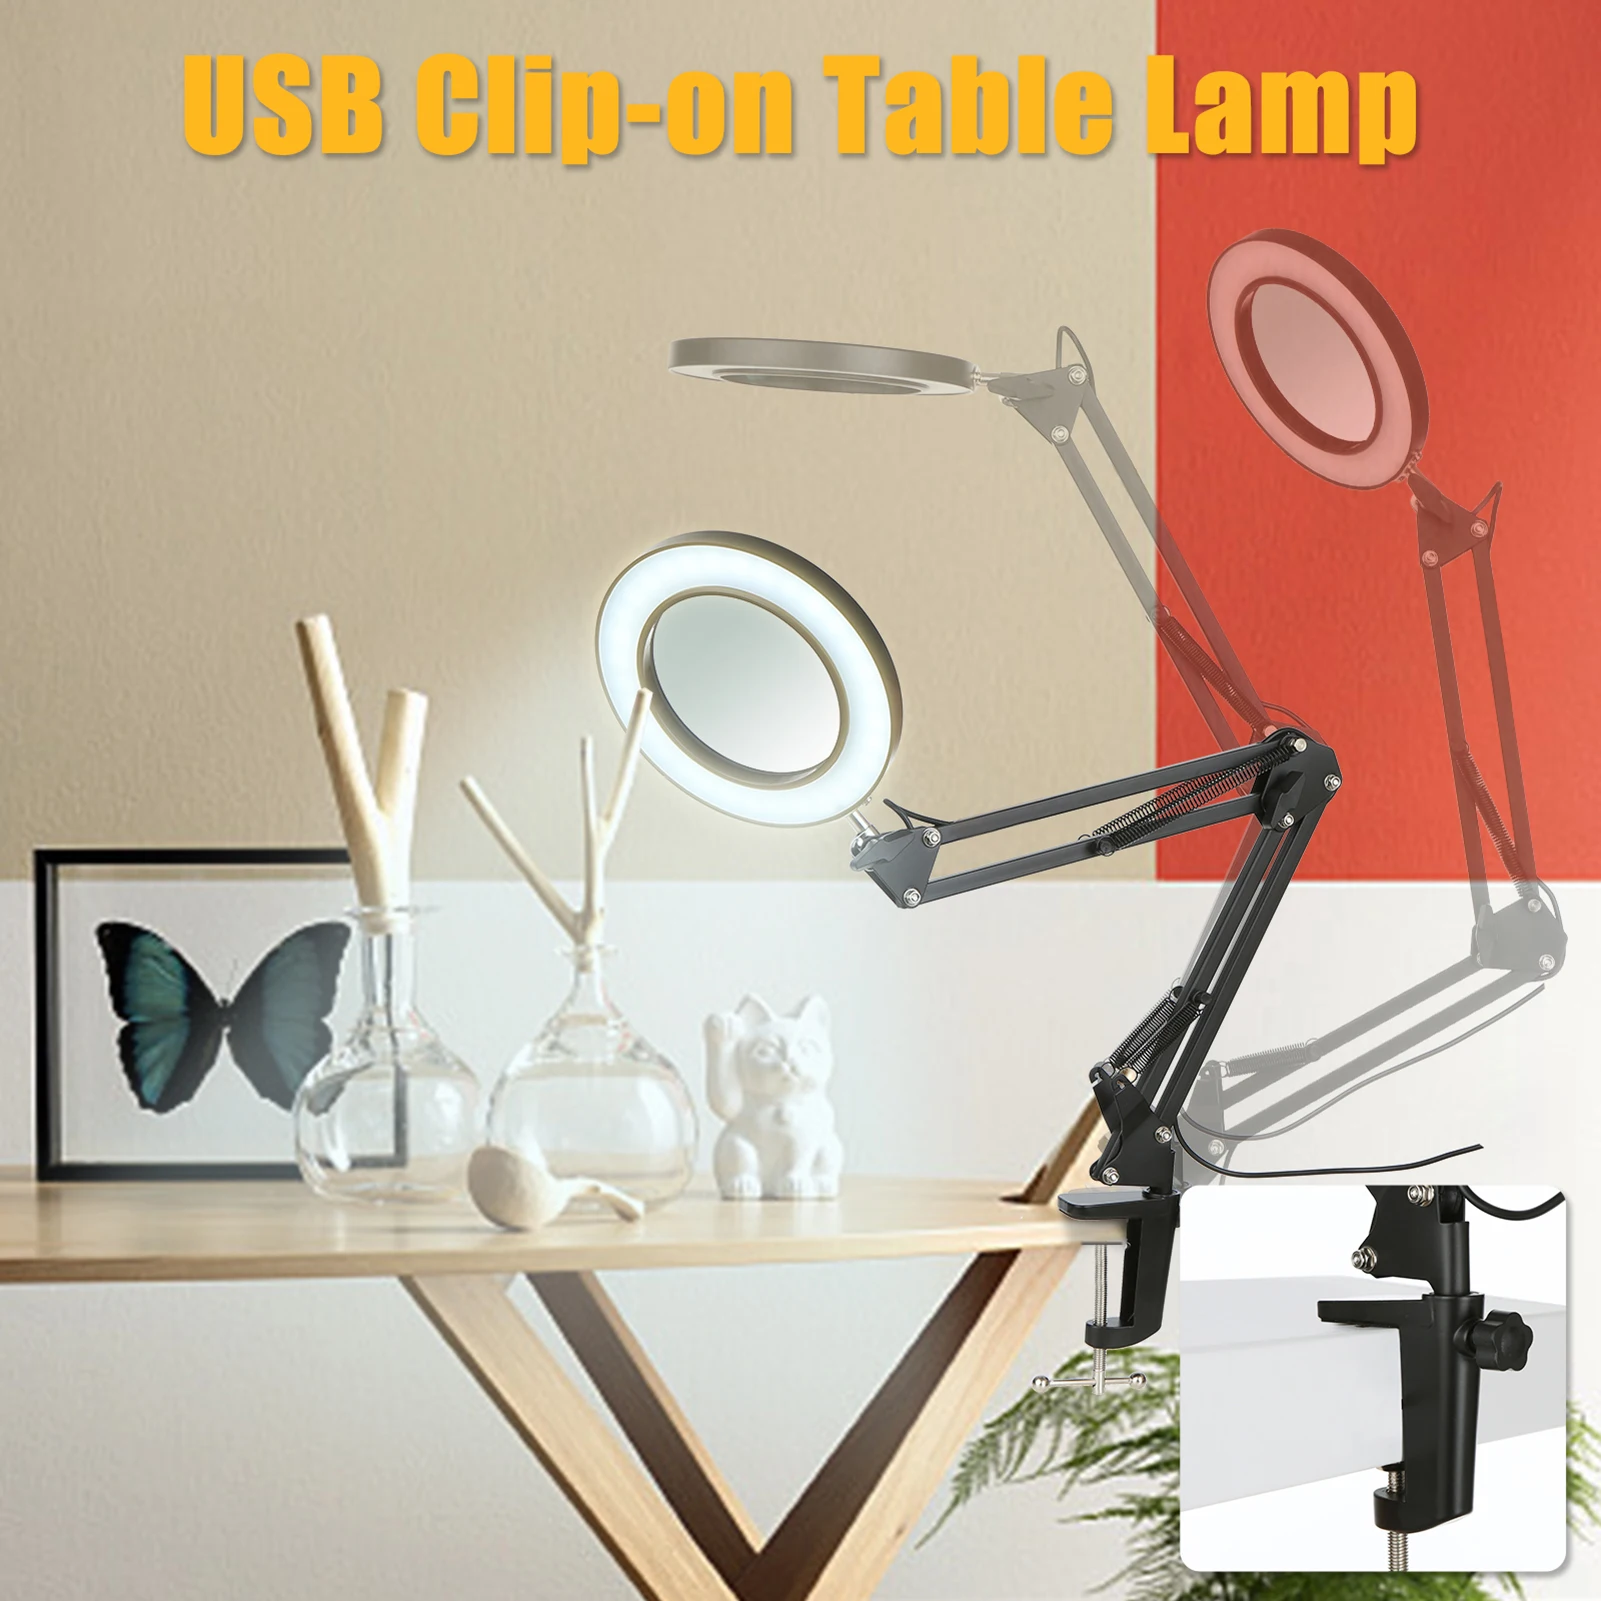 best tape measure for woodworkers Flexible Clamp-on Table Lamp with 8x Magnifier Glass Swing Arm Dimmable Illuminated Magnifier LEDs Desk Light 3 Color Modes Lamp measuring calipers